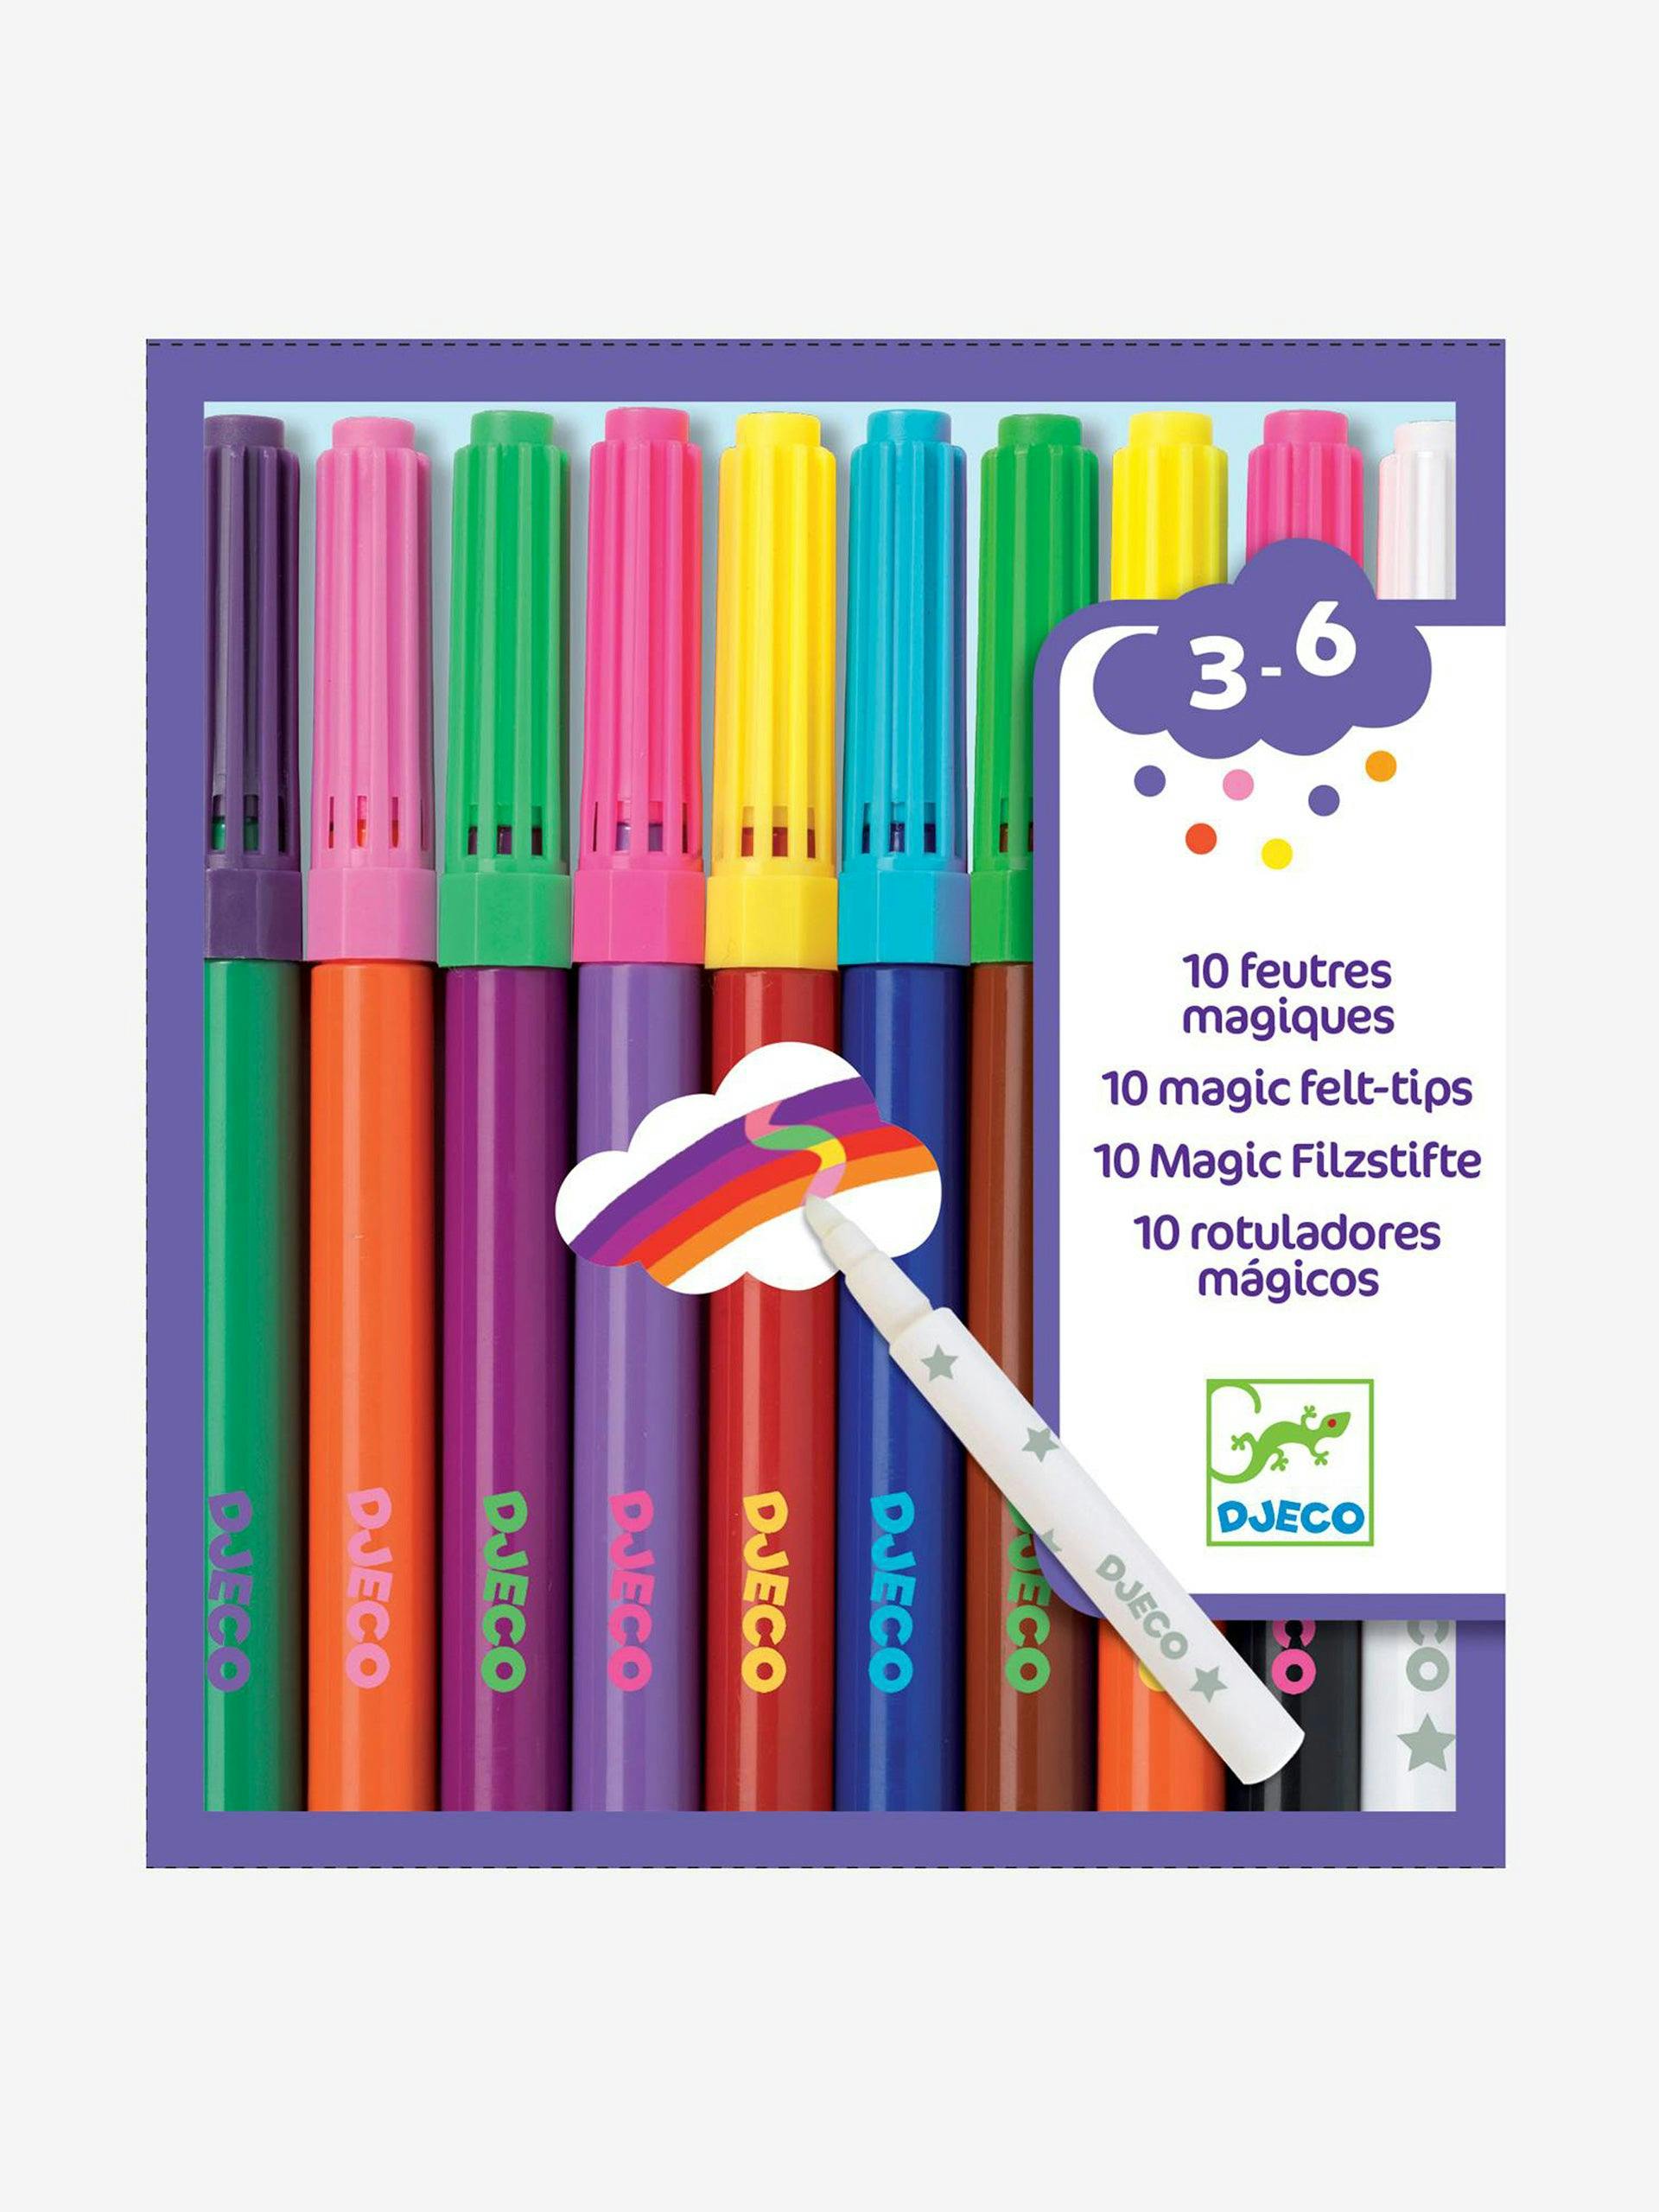 Colour-changing markers